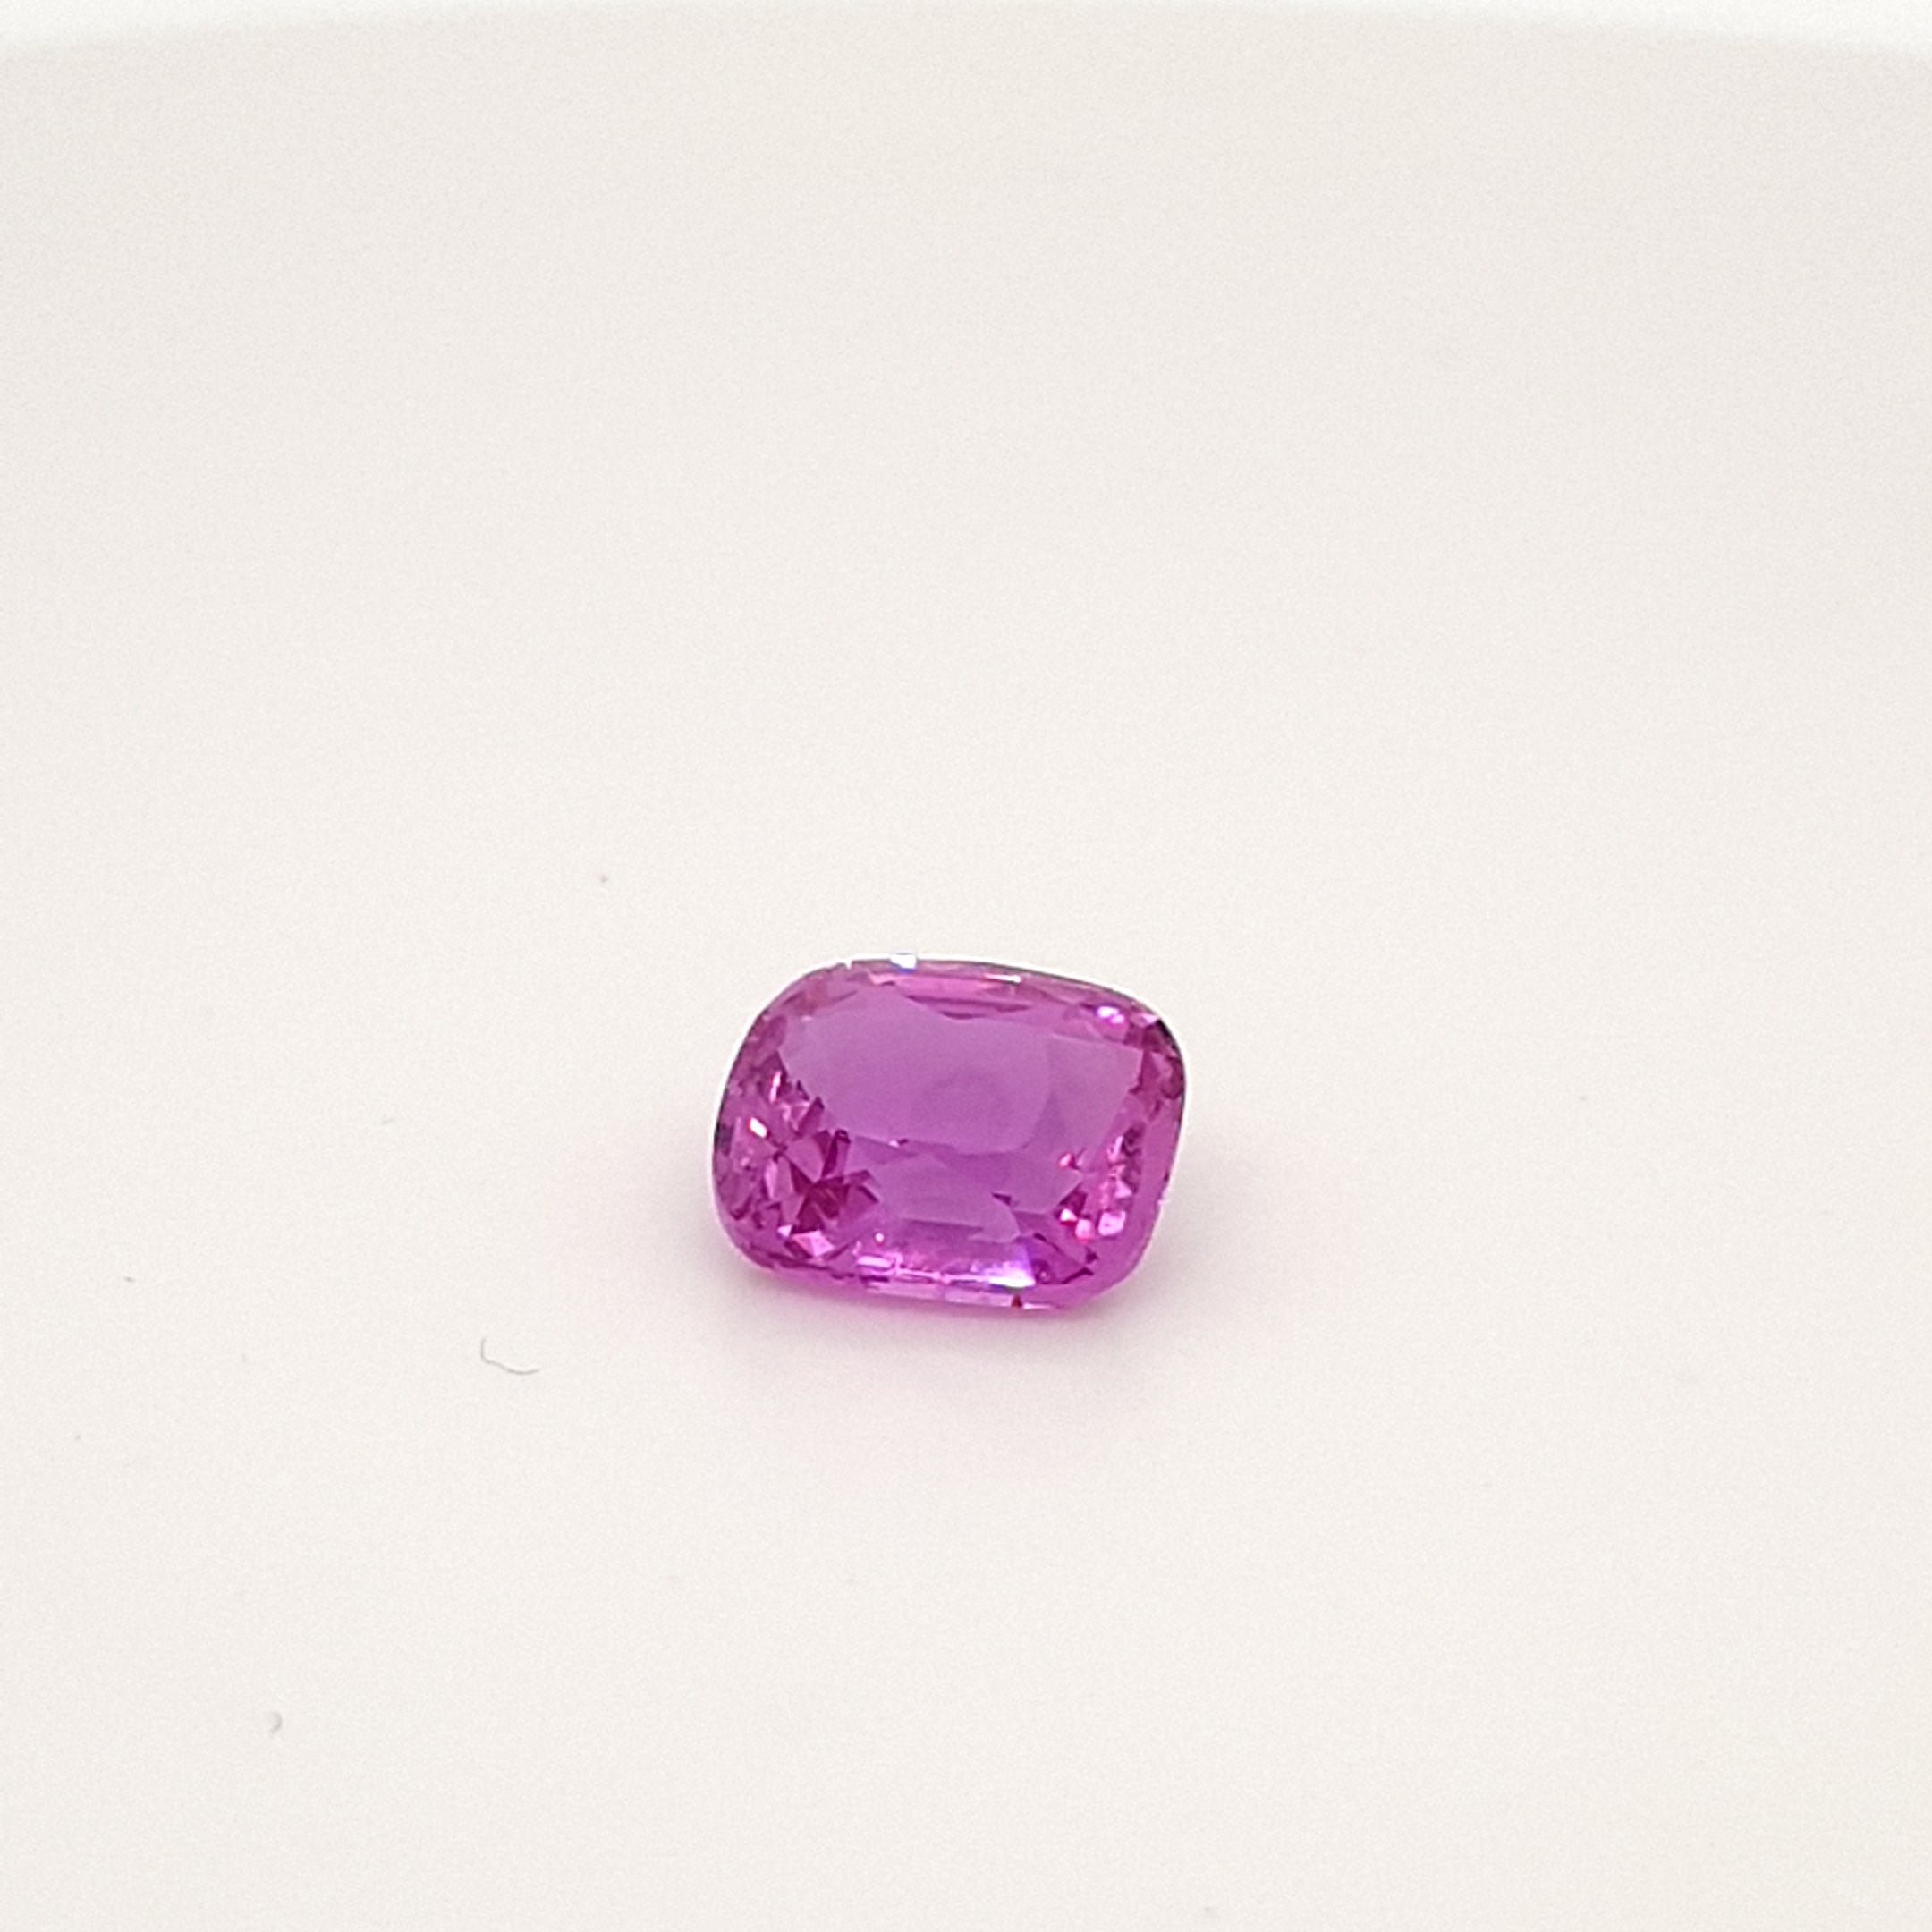 We are delighted to be able to offer for sale, this 3,04 ct. Sapphire from our exclusive collection.
This beautiful gem has a soft pink-violet color and a great fire. Cutting, proportion and cleaness enable an very high light return from every